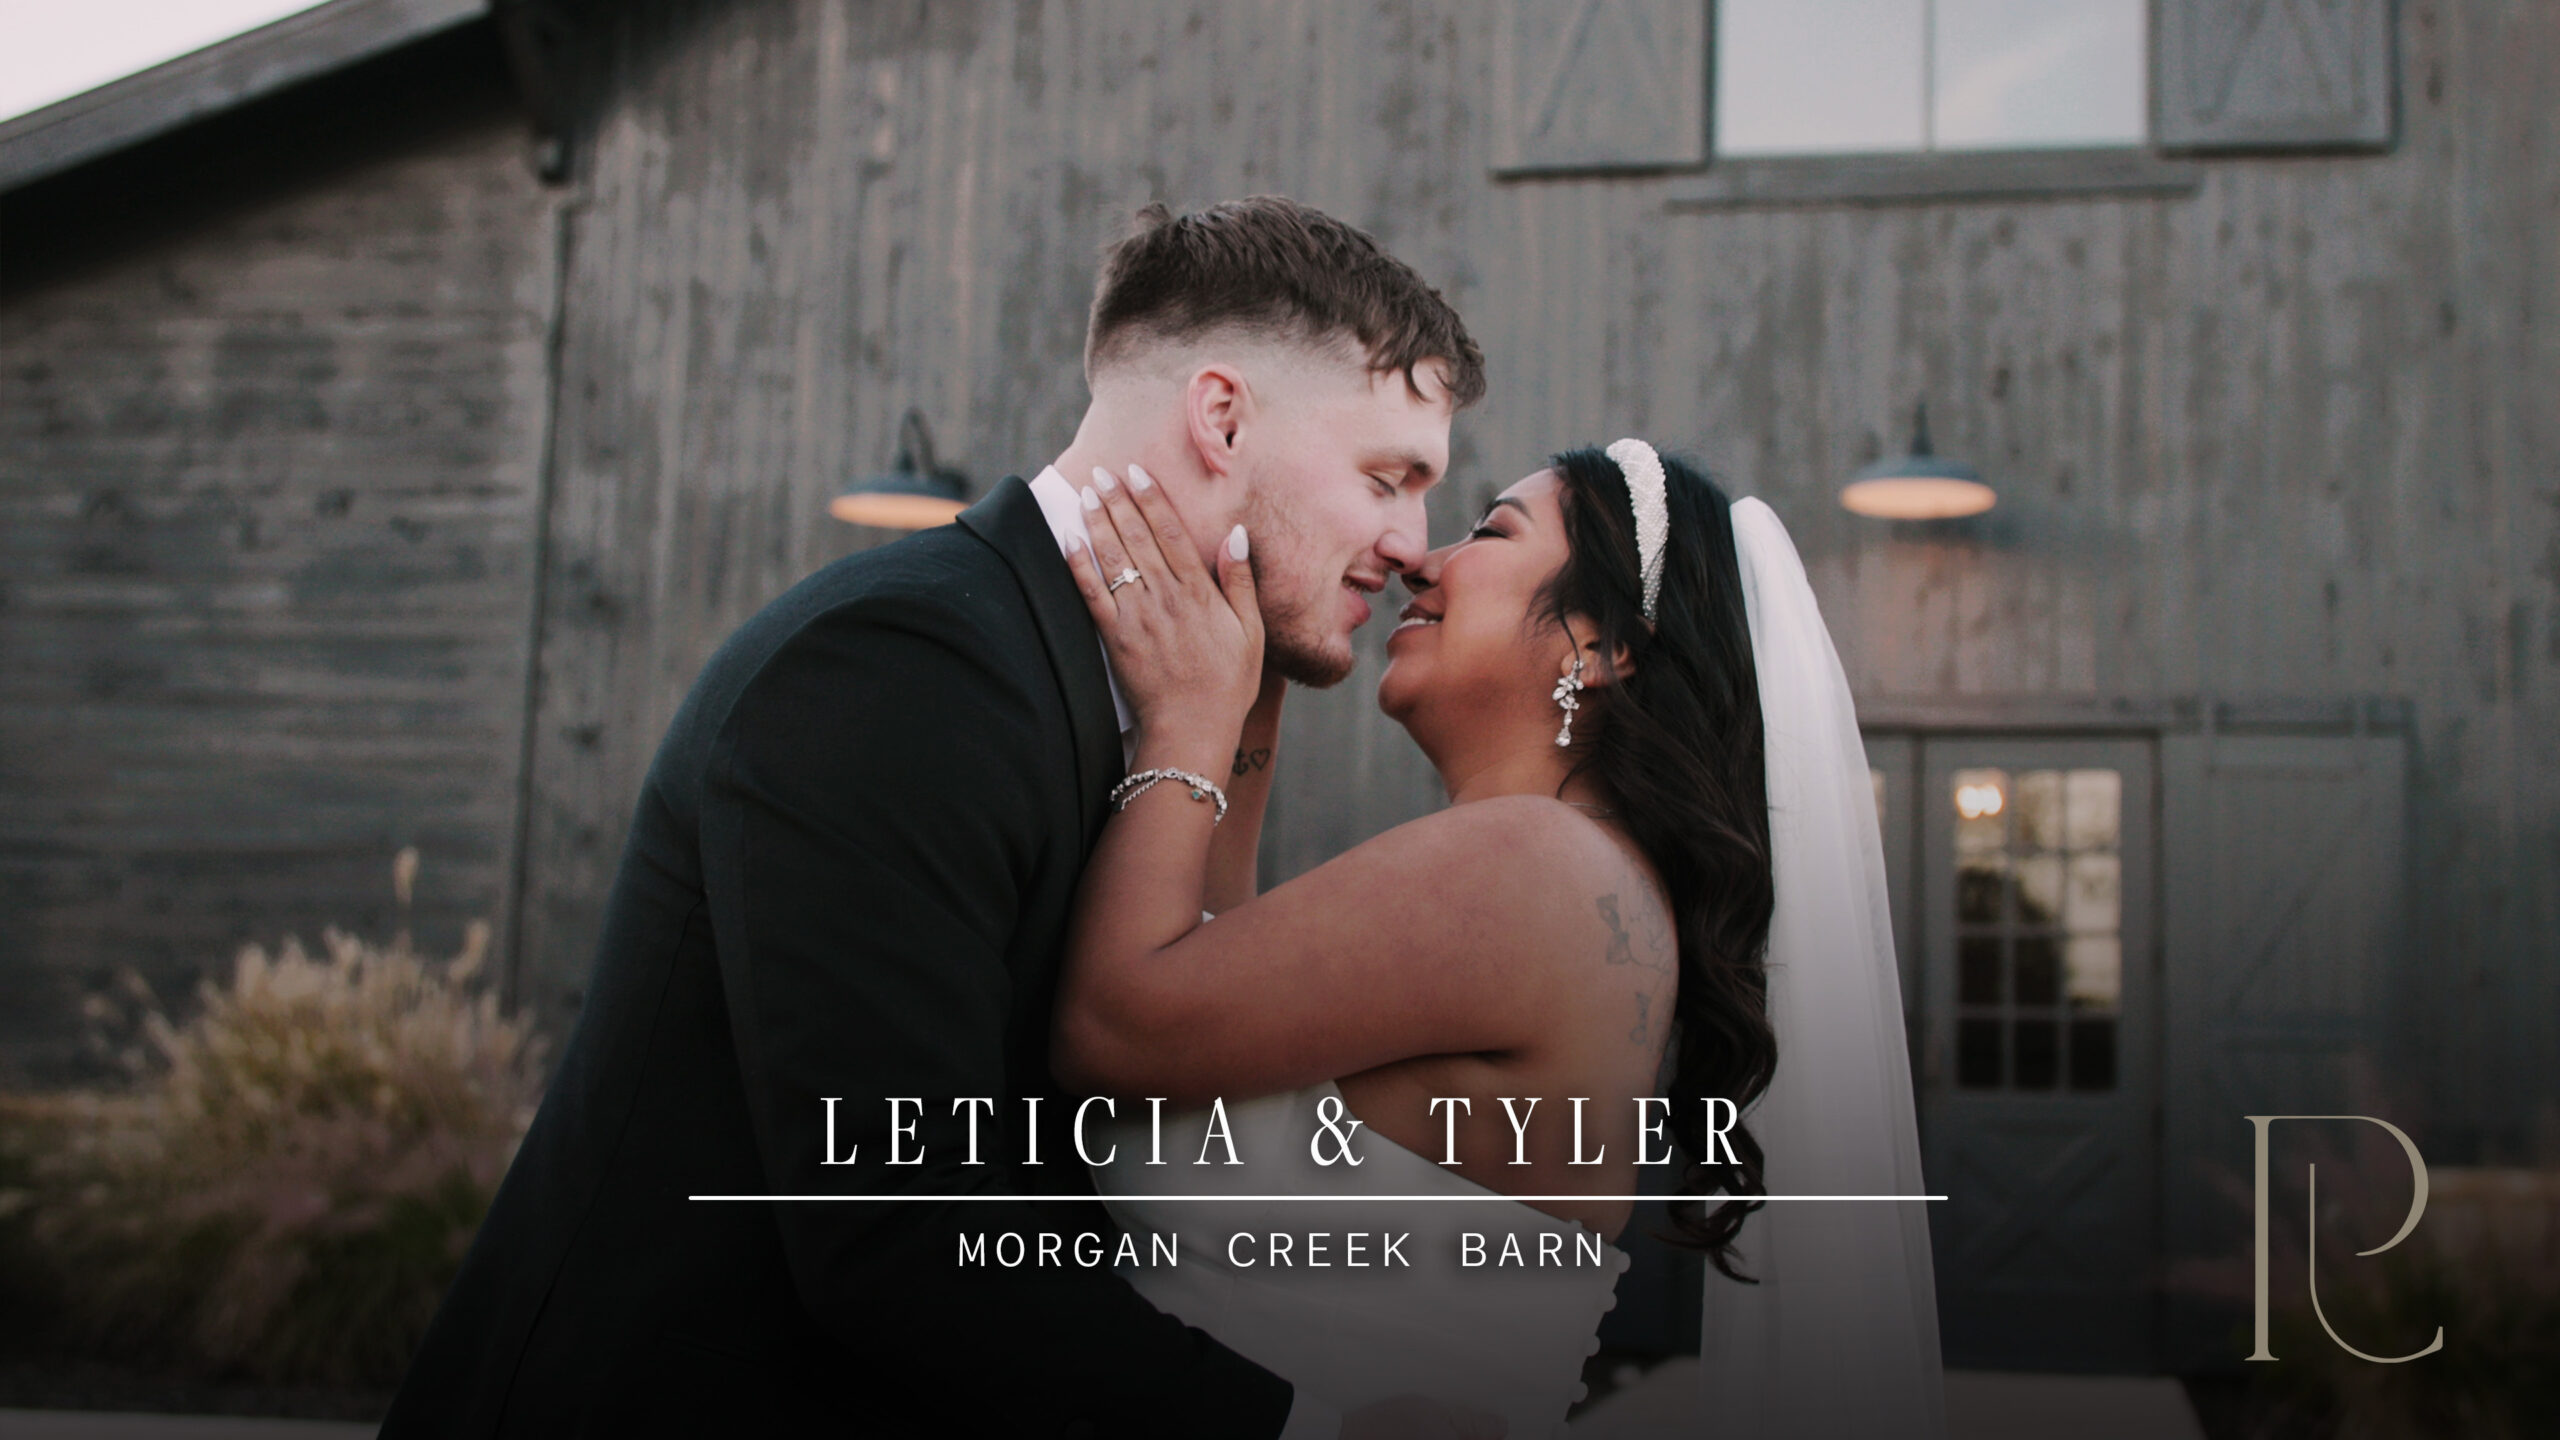 Leticia and Tyler kissing on their wedding day in front of Morgan Creek Barn